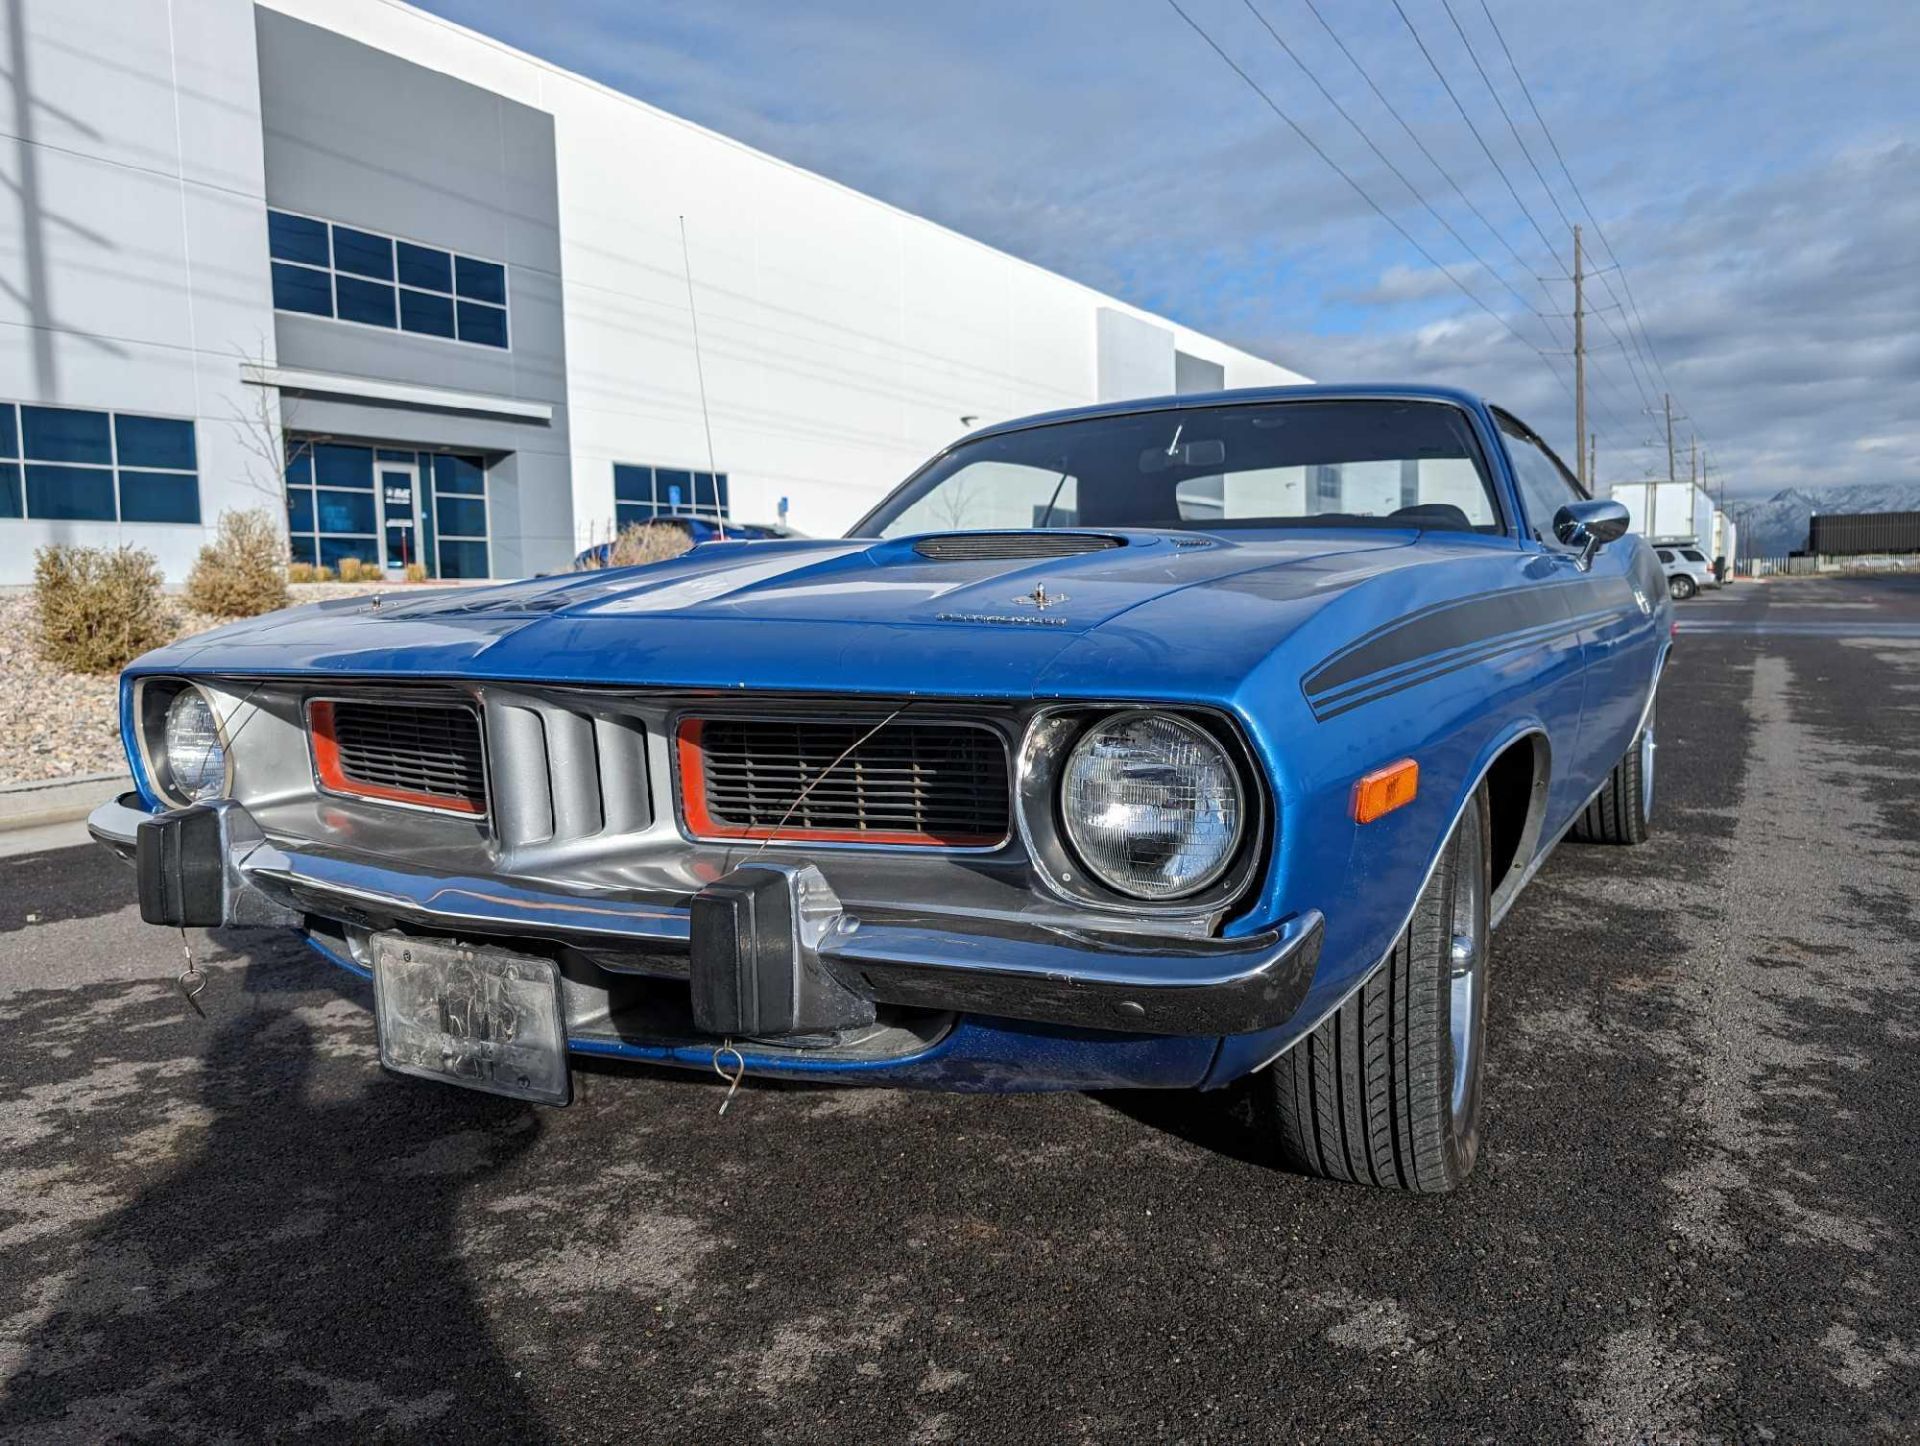 1973 Plymouth Cuda Vin #BS23H3B319203, Cuda 340 Engine, Runs and Drives Clean Features and notes: Vi - Image 16 of 29